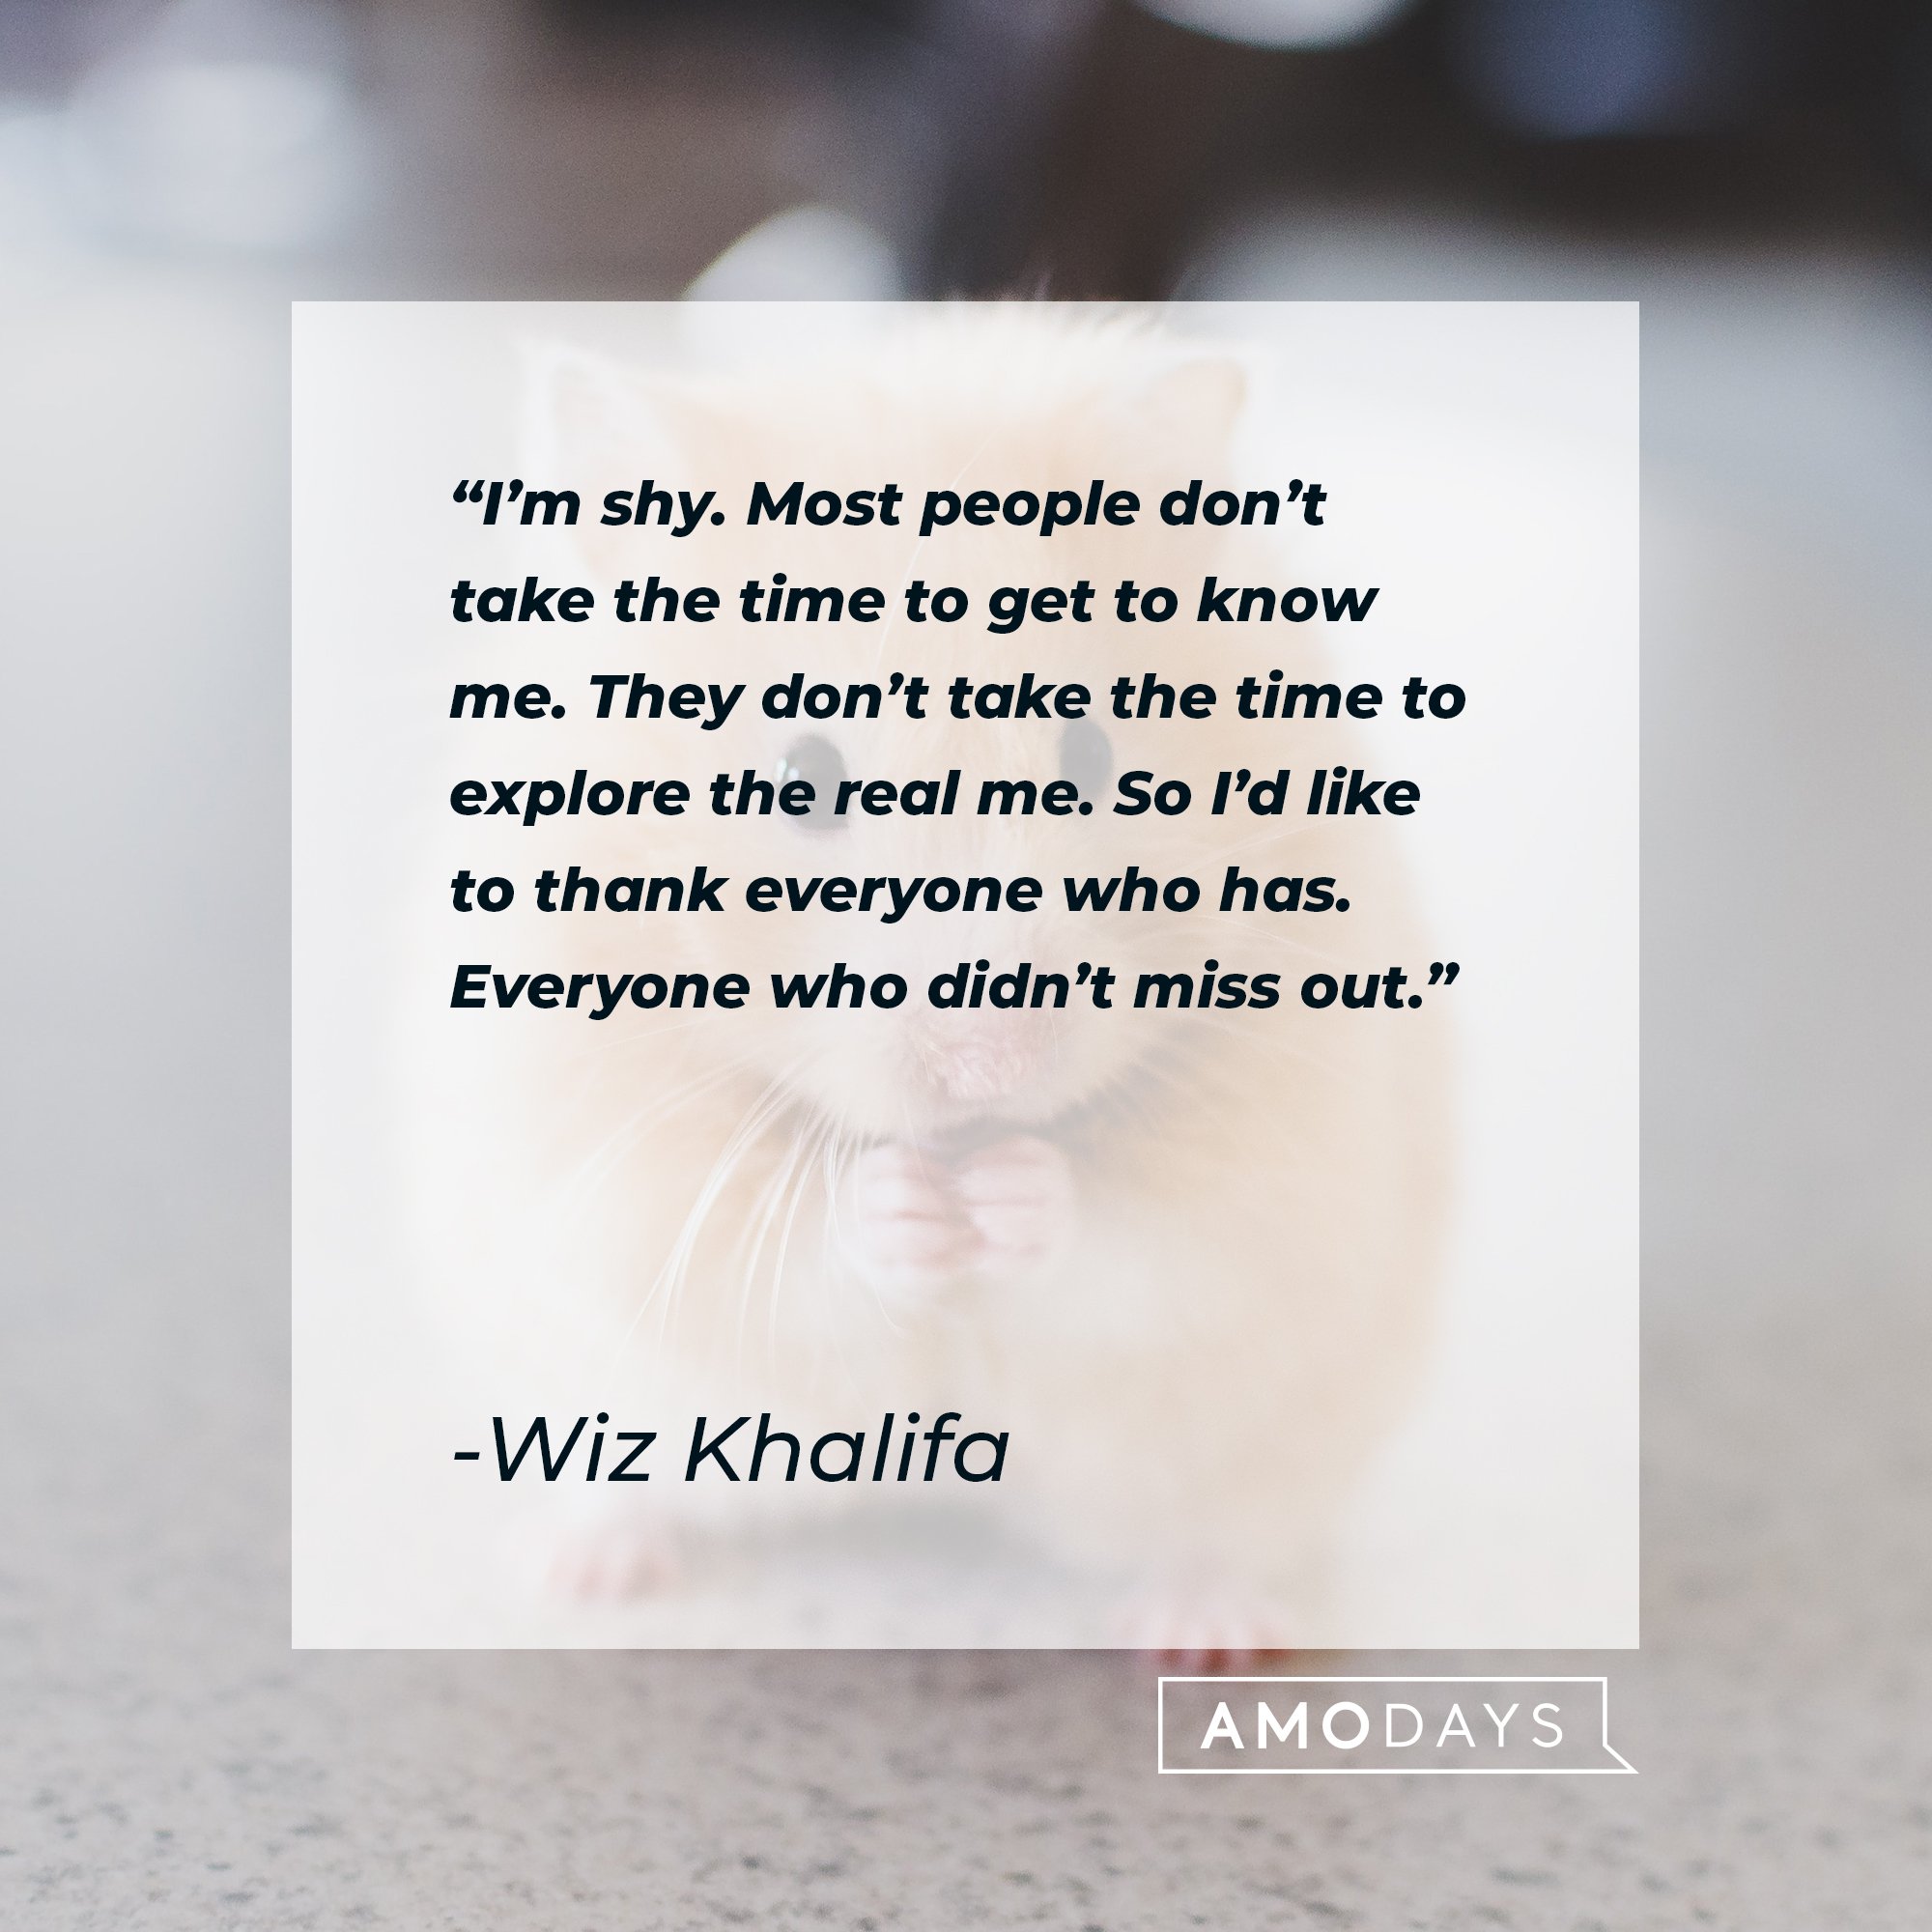 Wiz Khalifa's quote: “I’m shy. Most people don’t take the time to get to know me. They don’t take the time to explore the real me. So I’d like to thank everyone who has. Everyone who didn’t miss out.” | Image: AmoDays